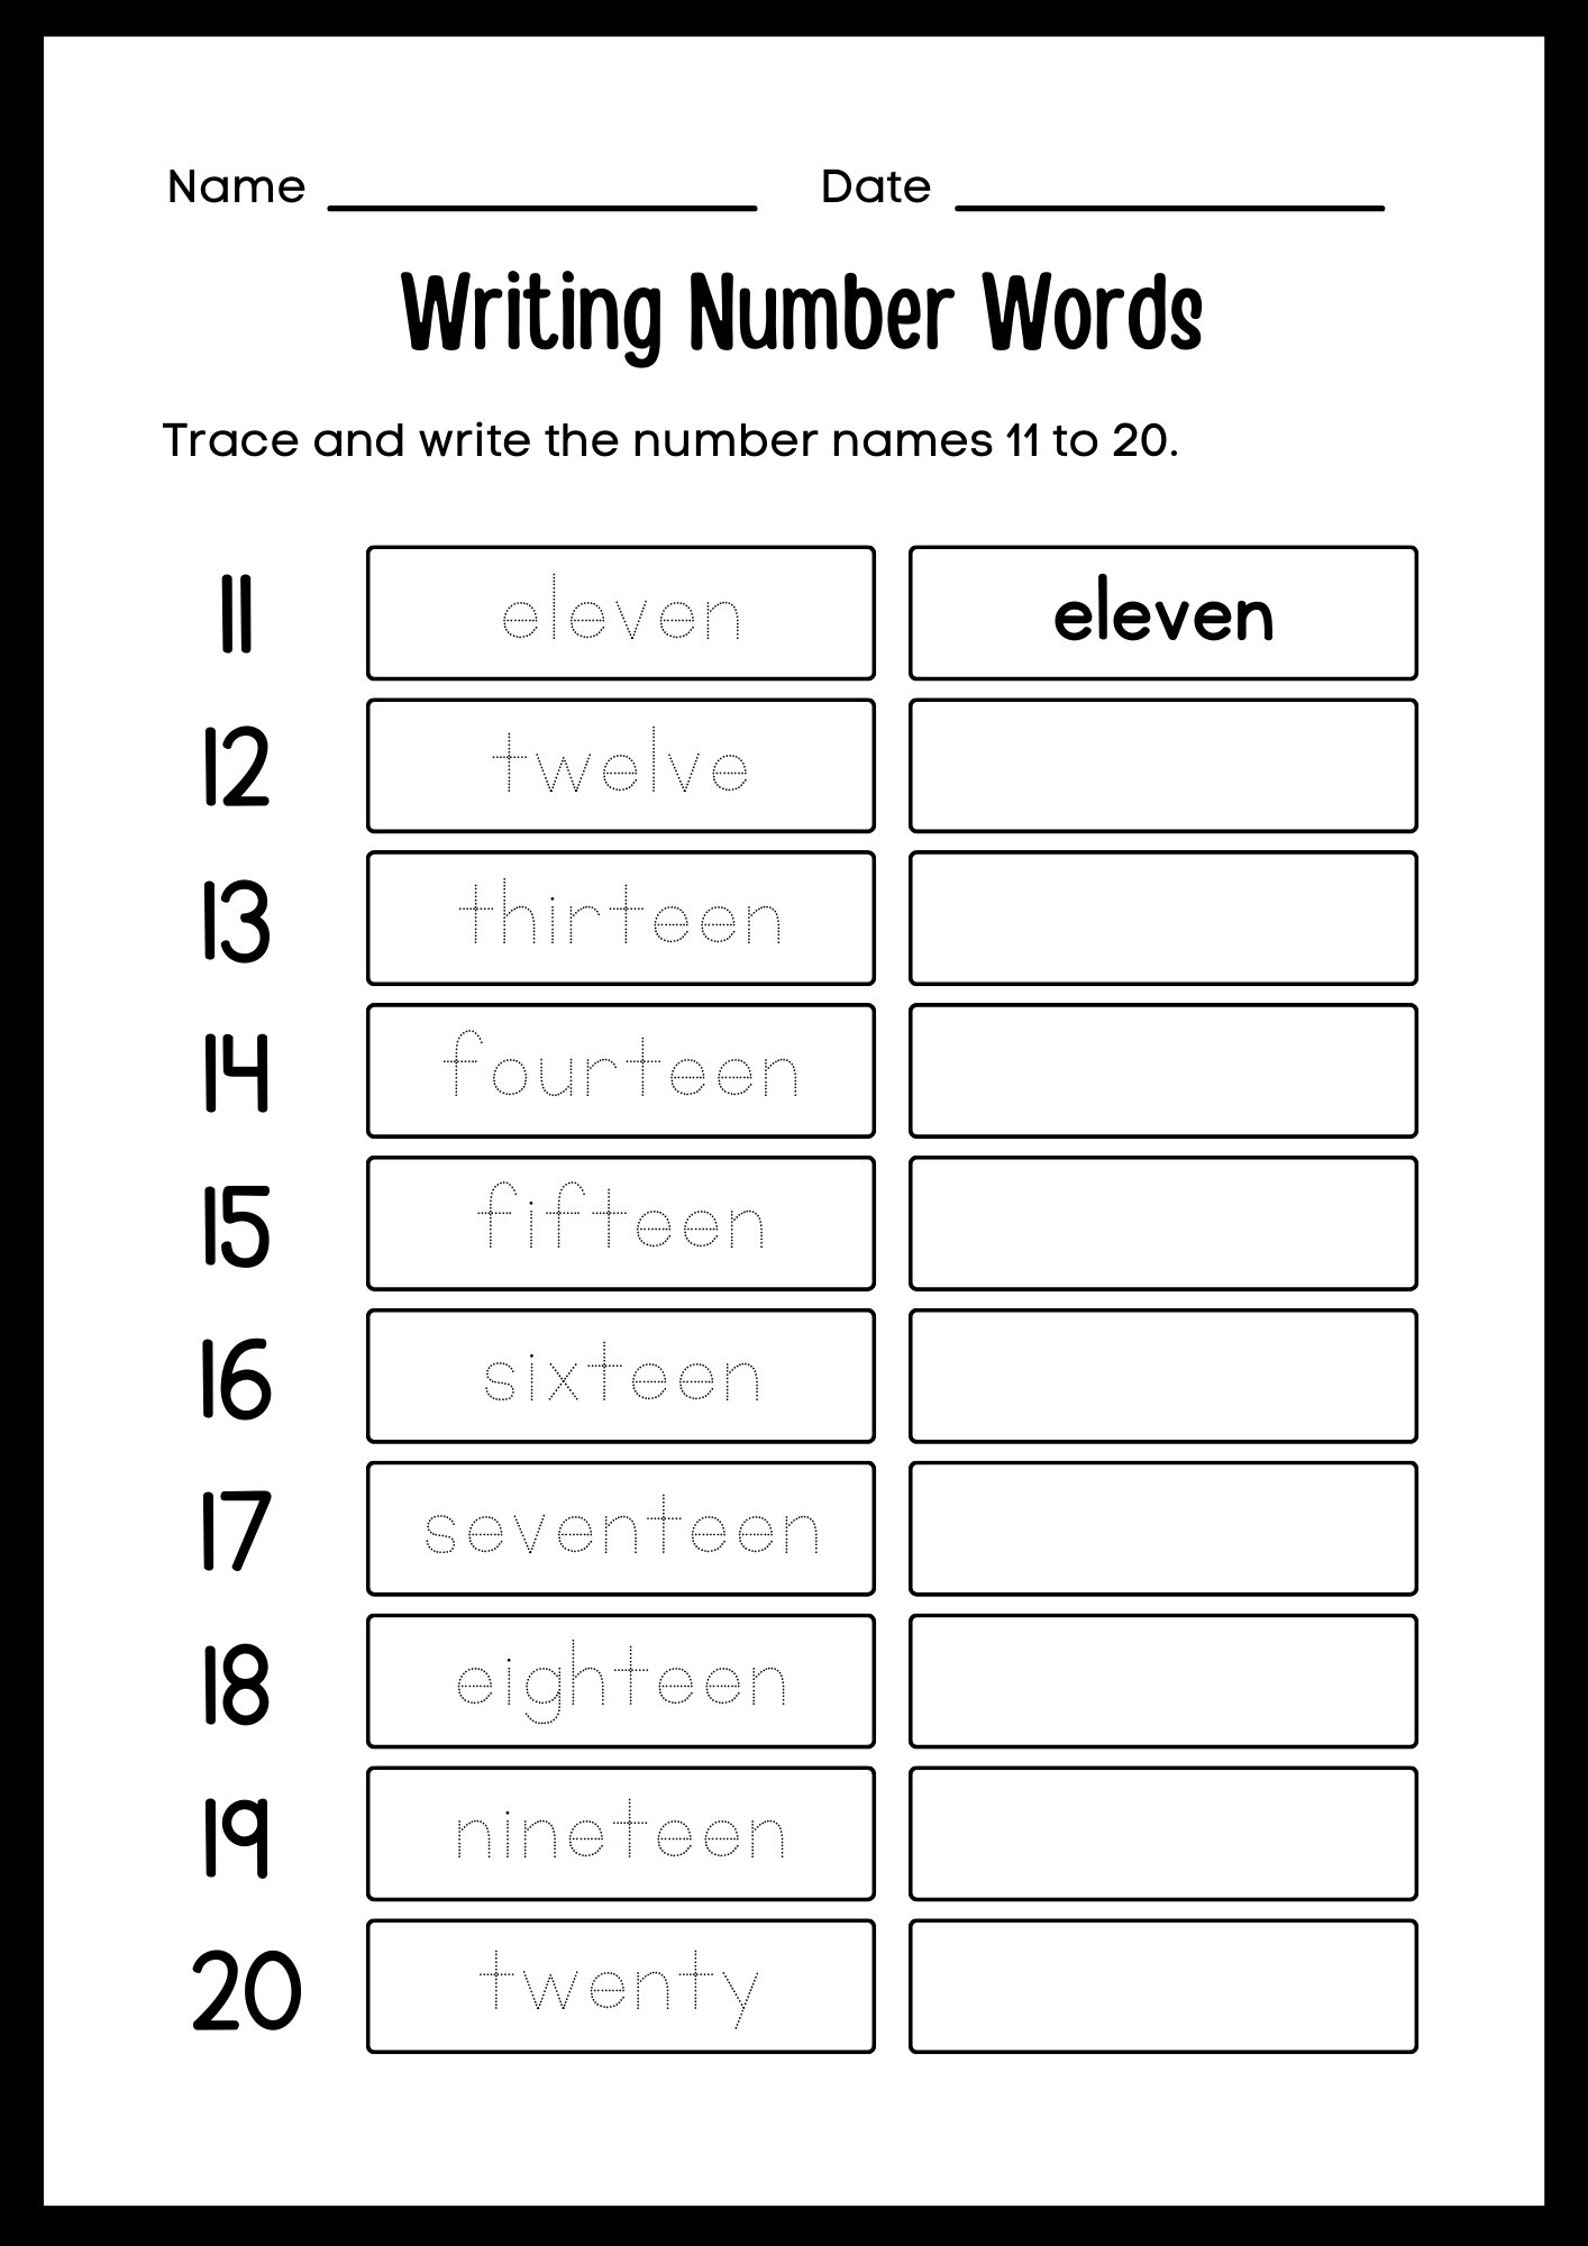 writing-numbers-1-to-20-in-words-math-worksheets-for-kids-etsy